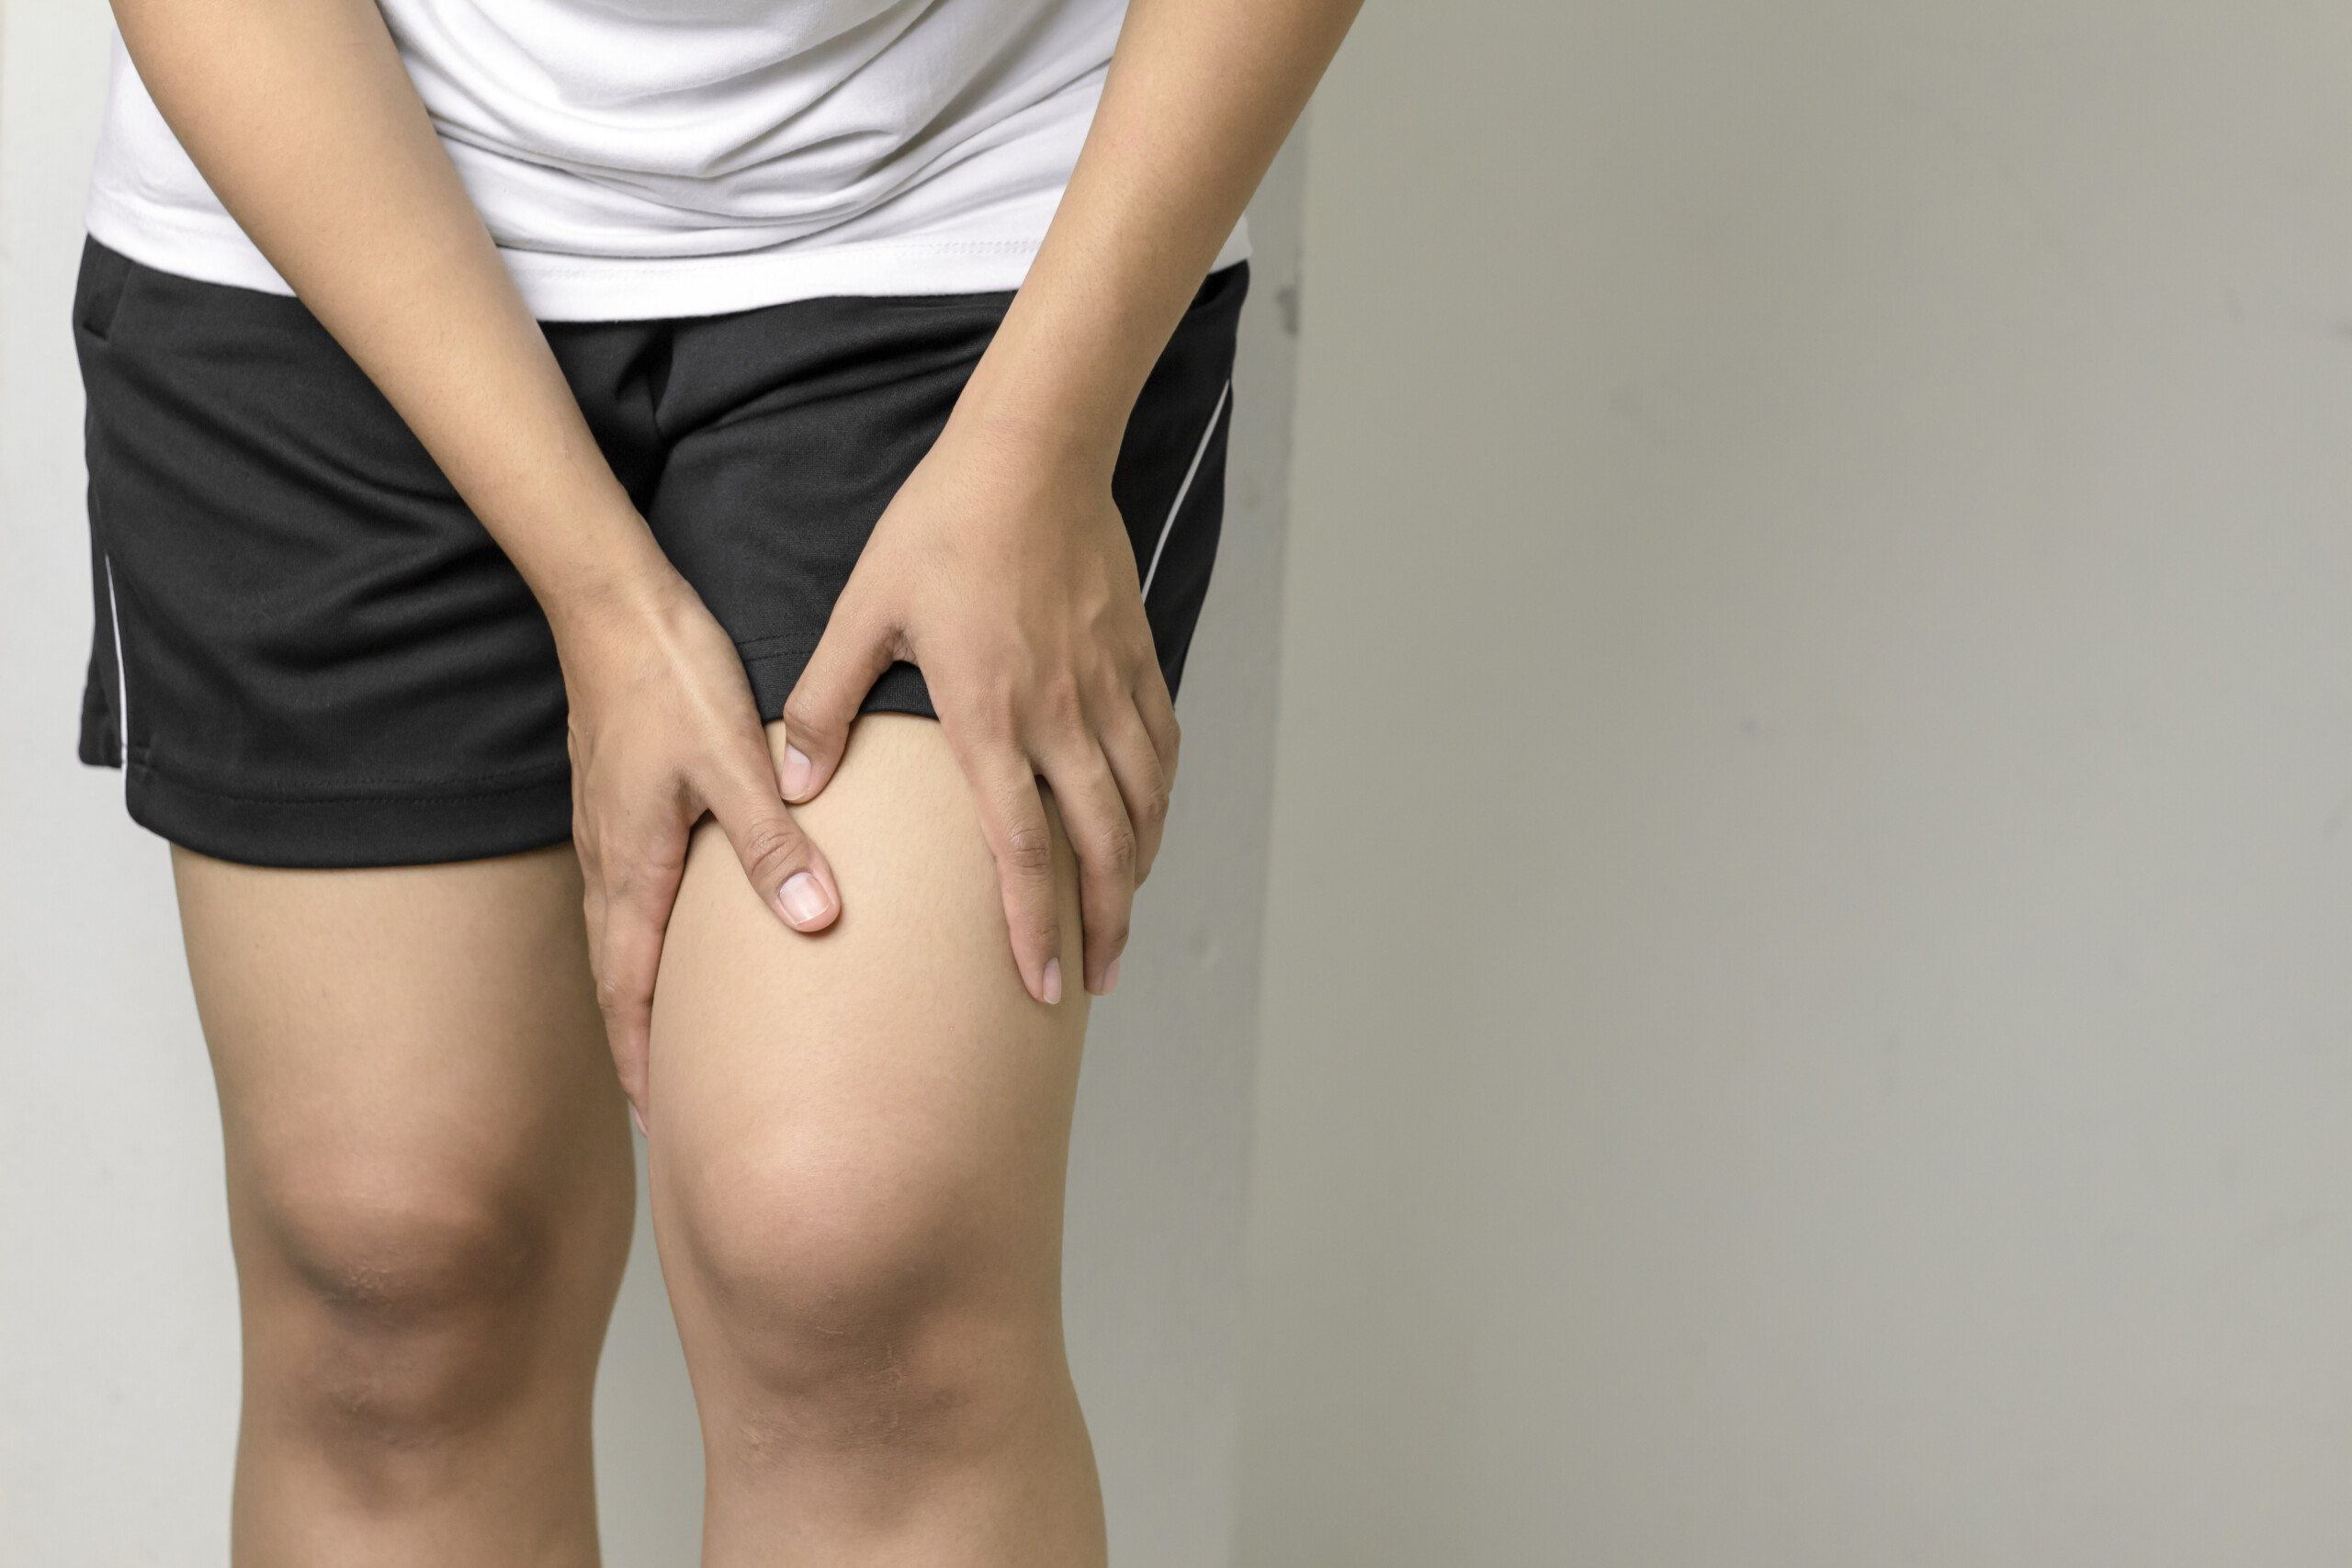 Can a Heart Problem Cause a Warm Sensation in the Leg?